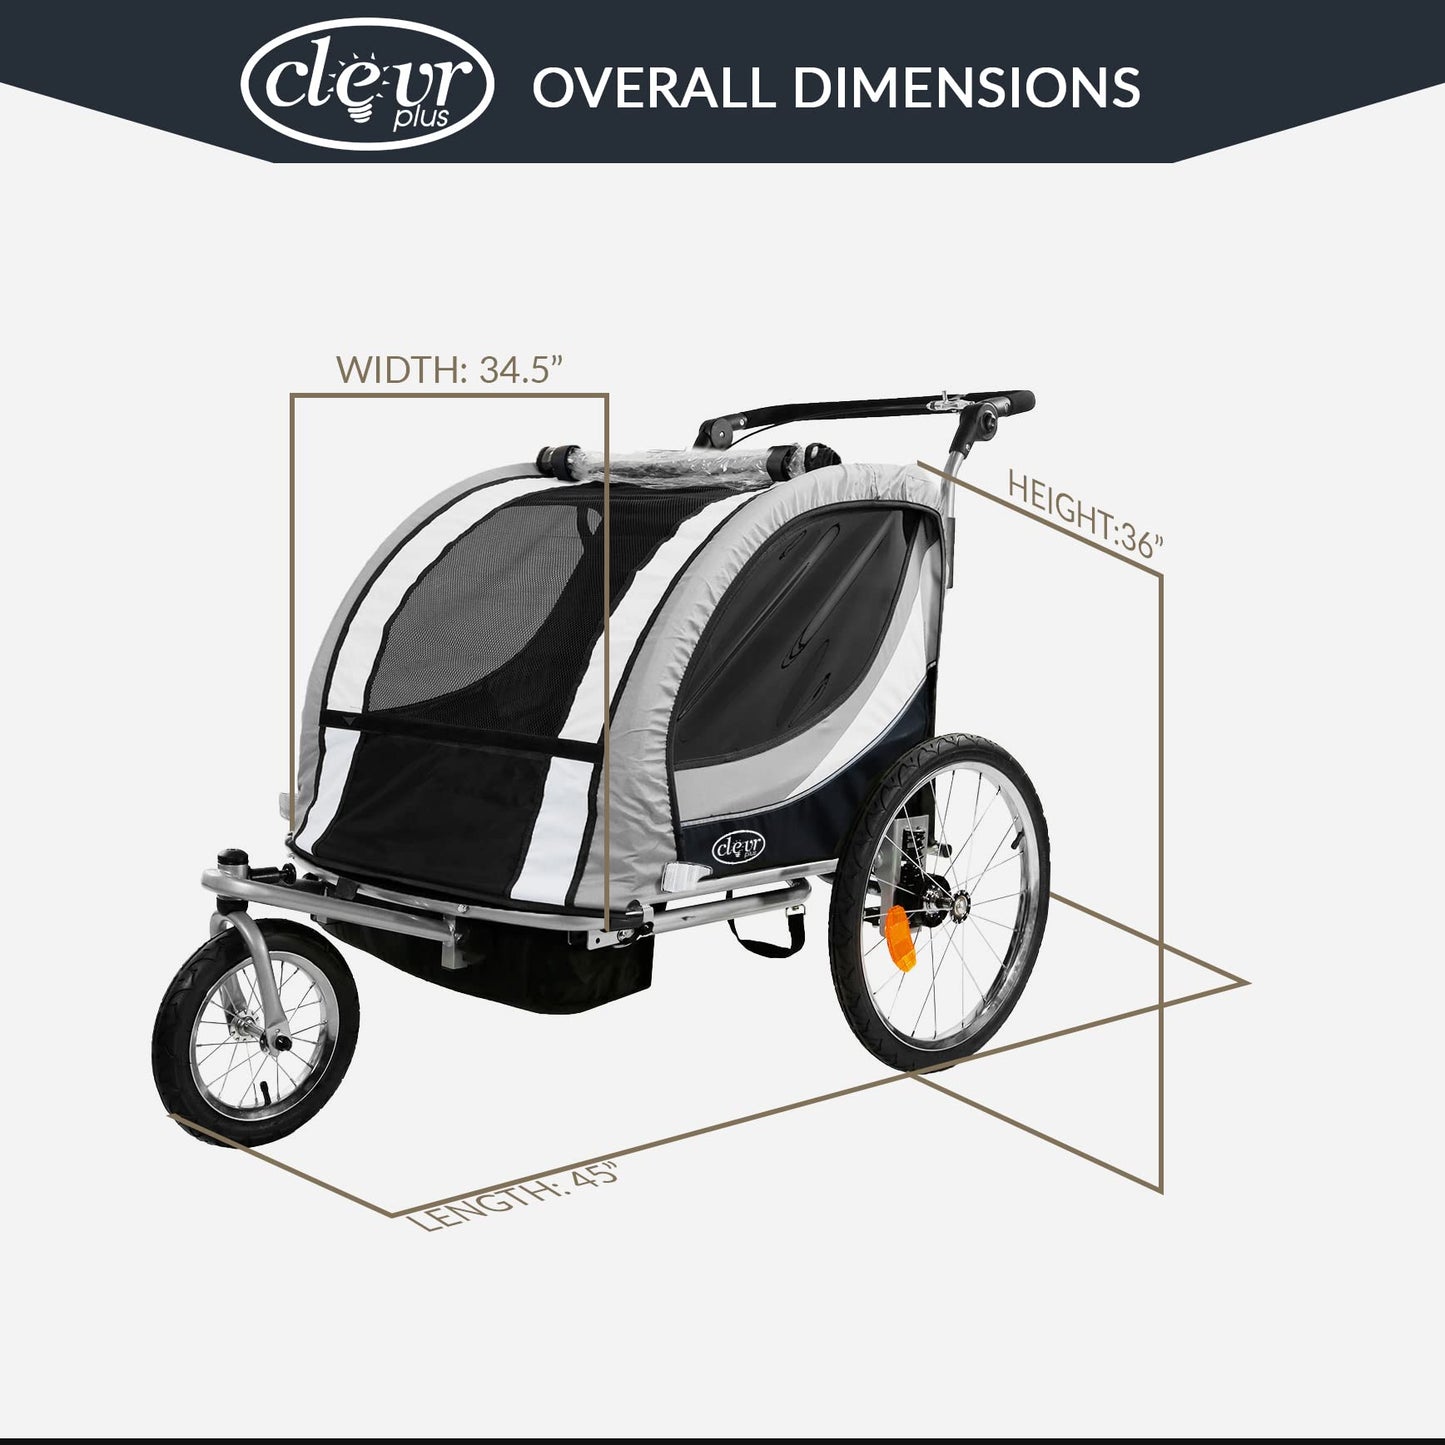 ClevrPlus Deluxe 3-in-1 Double 2 Seat Bicycle Bike Trailer 7